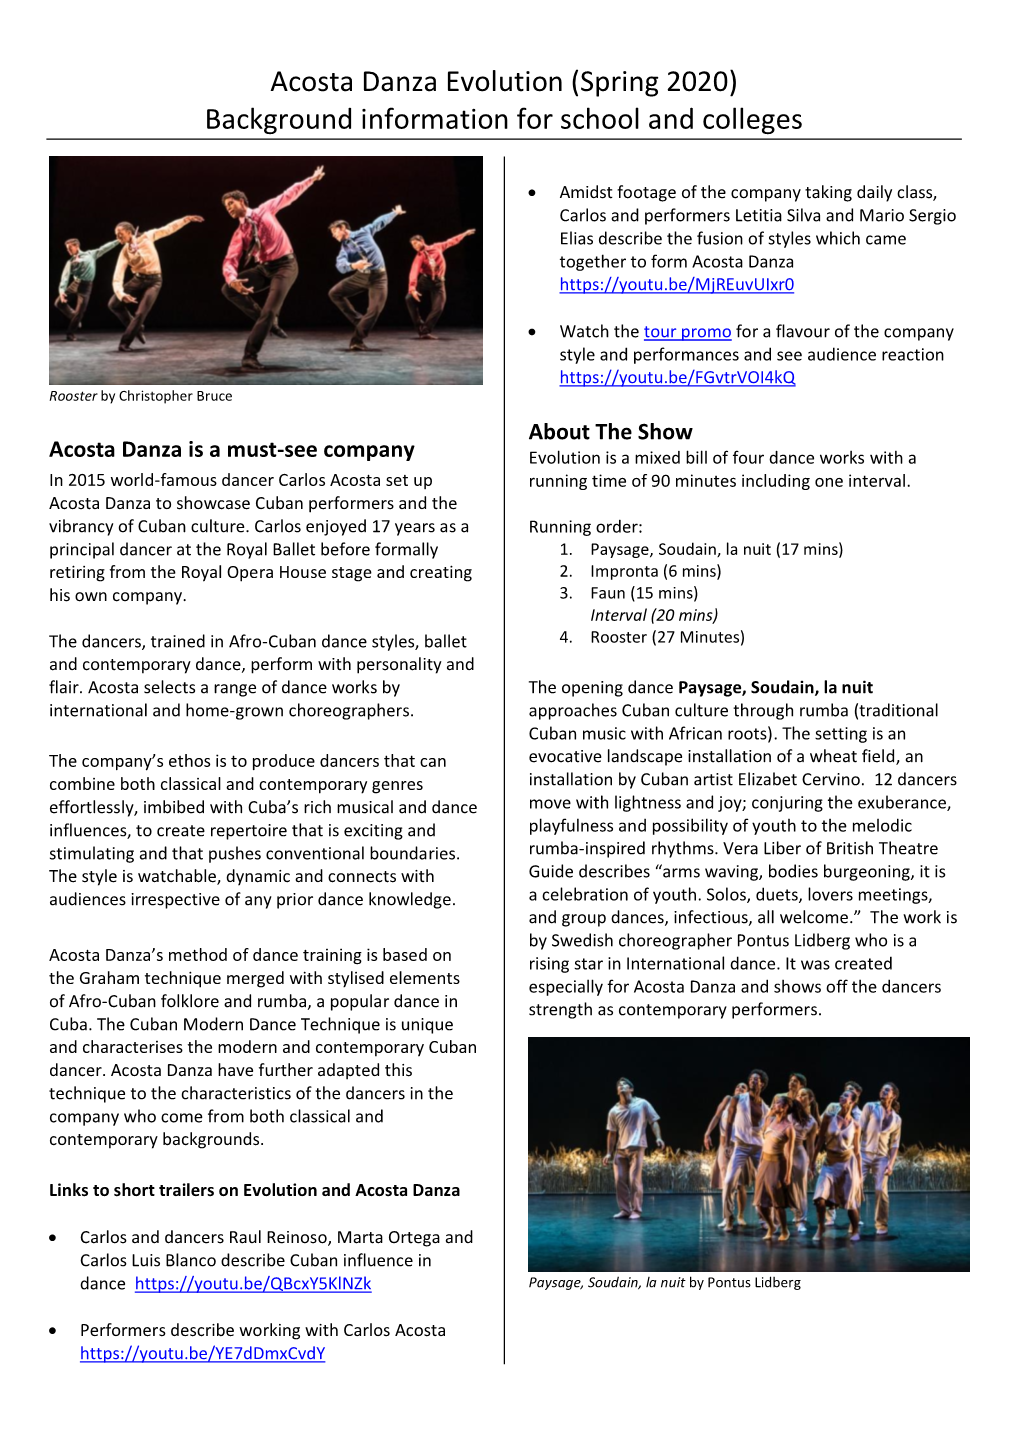 Acosta Danza Evolution (Spring 2020) Background Information for School and Colleges